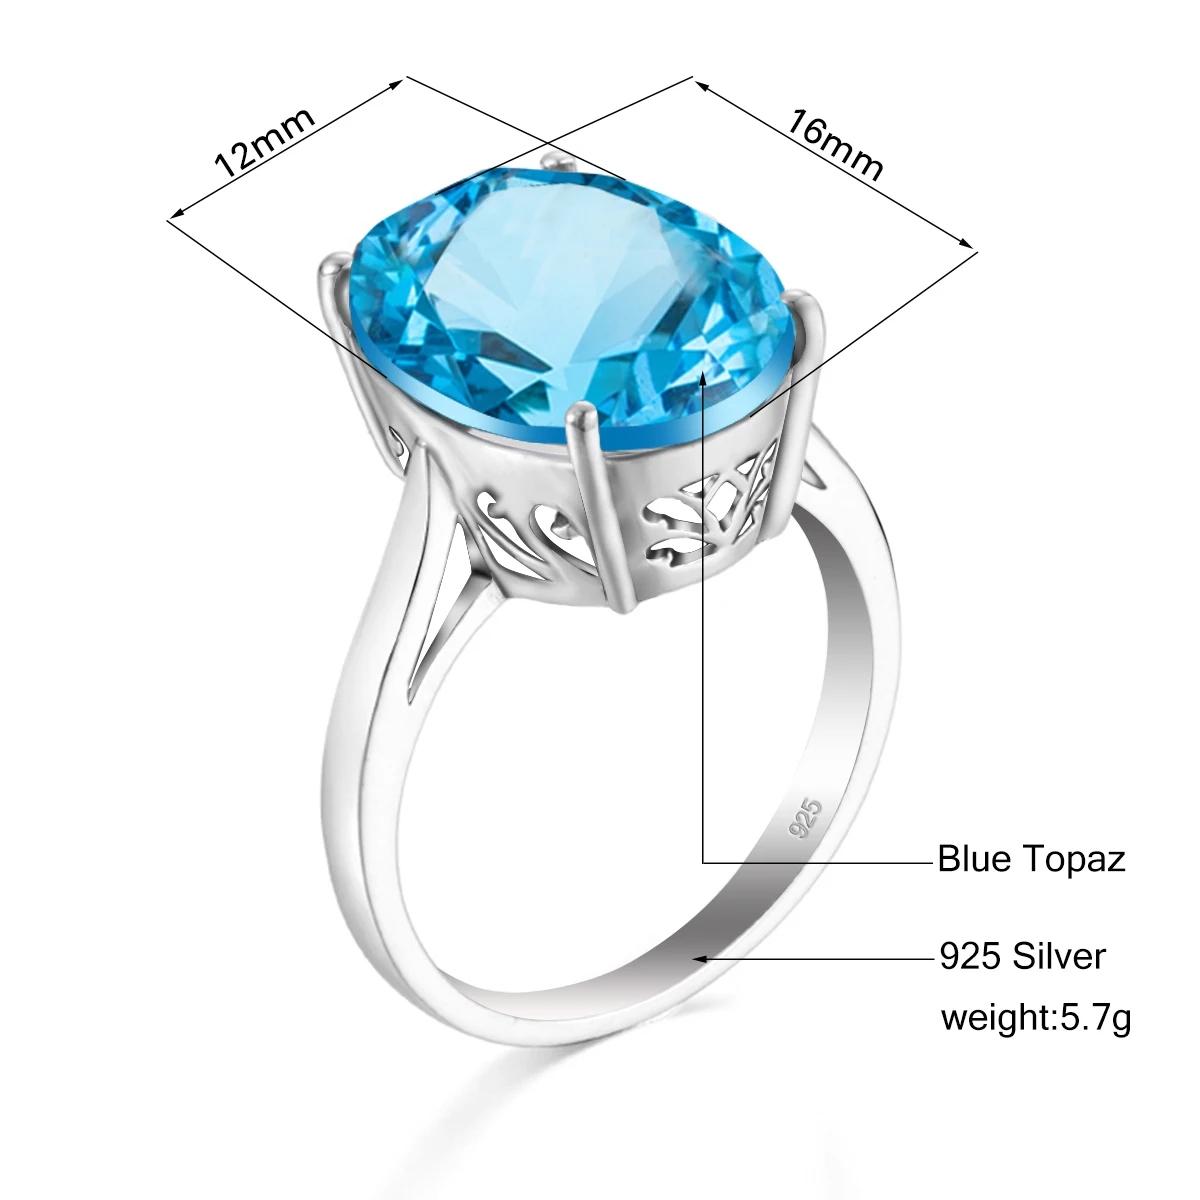 Solid 925 Sterling Silver Two Tone Collectible Jewelry Natural Blue Topaz Gemstone Ring Size 6 